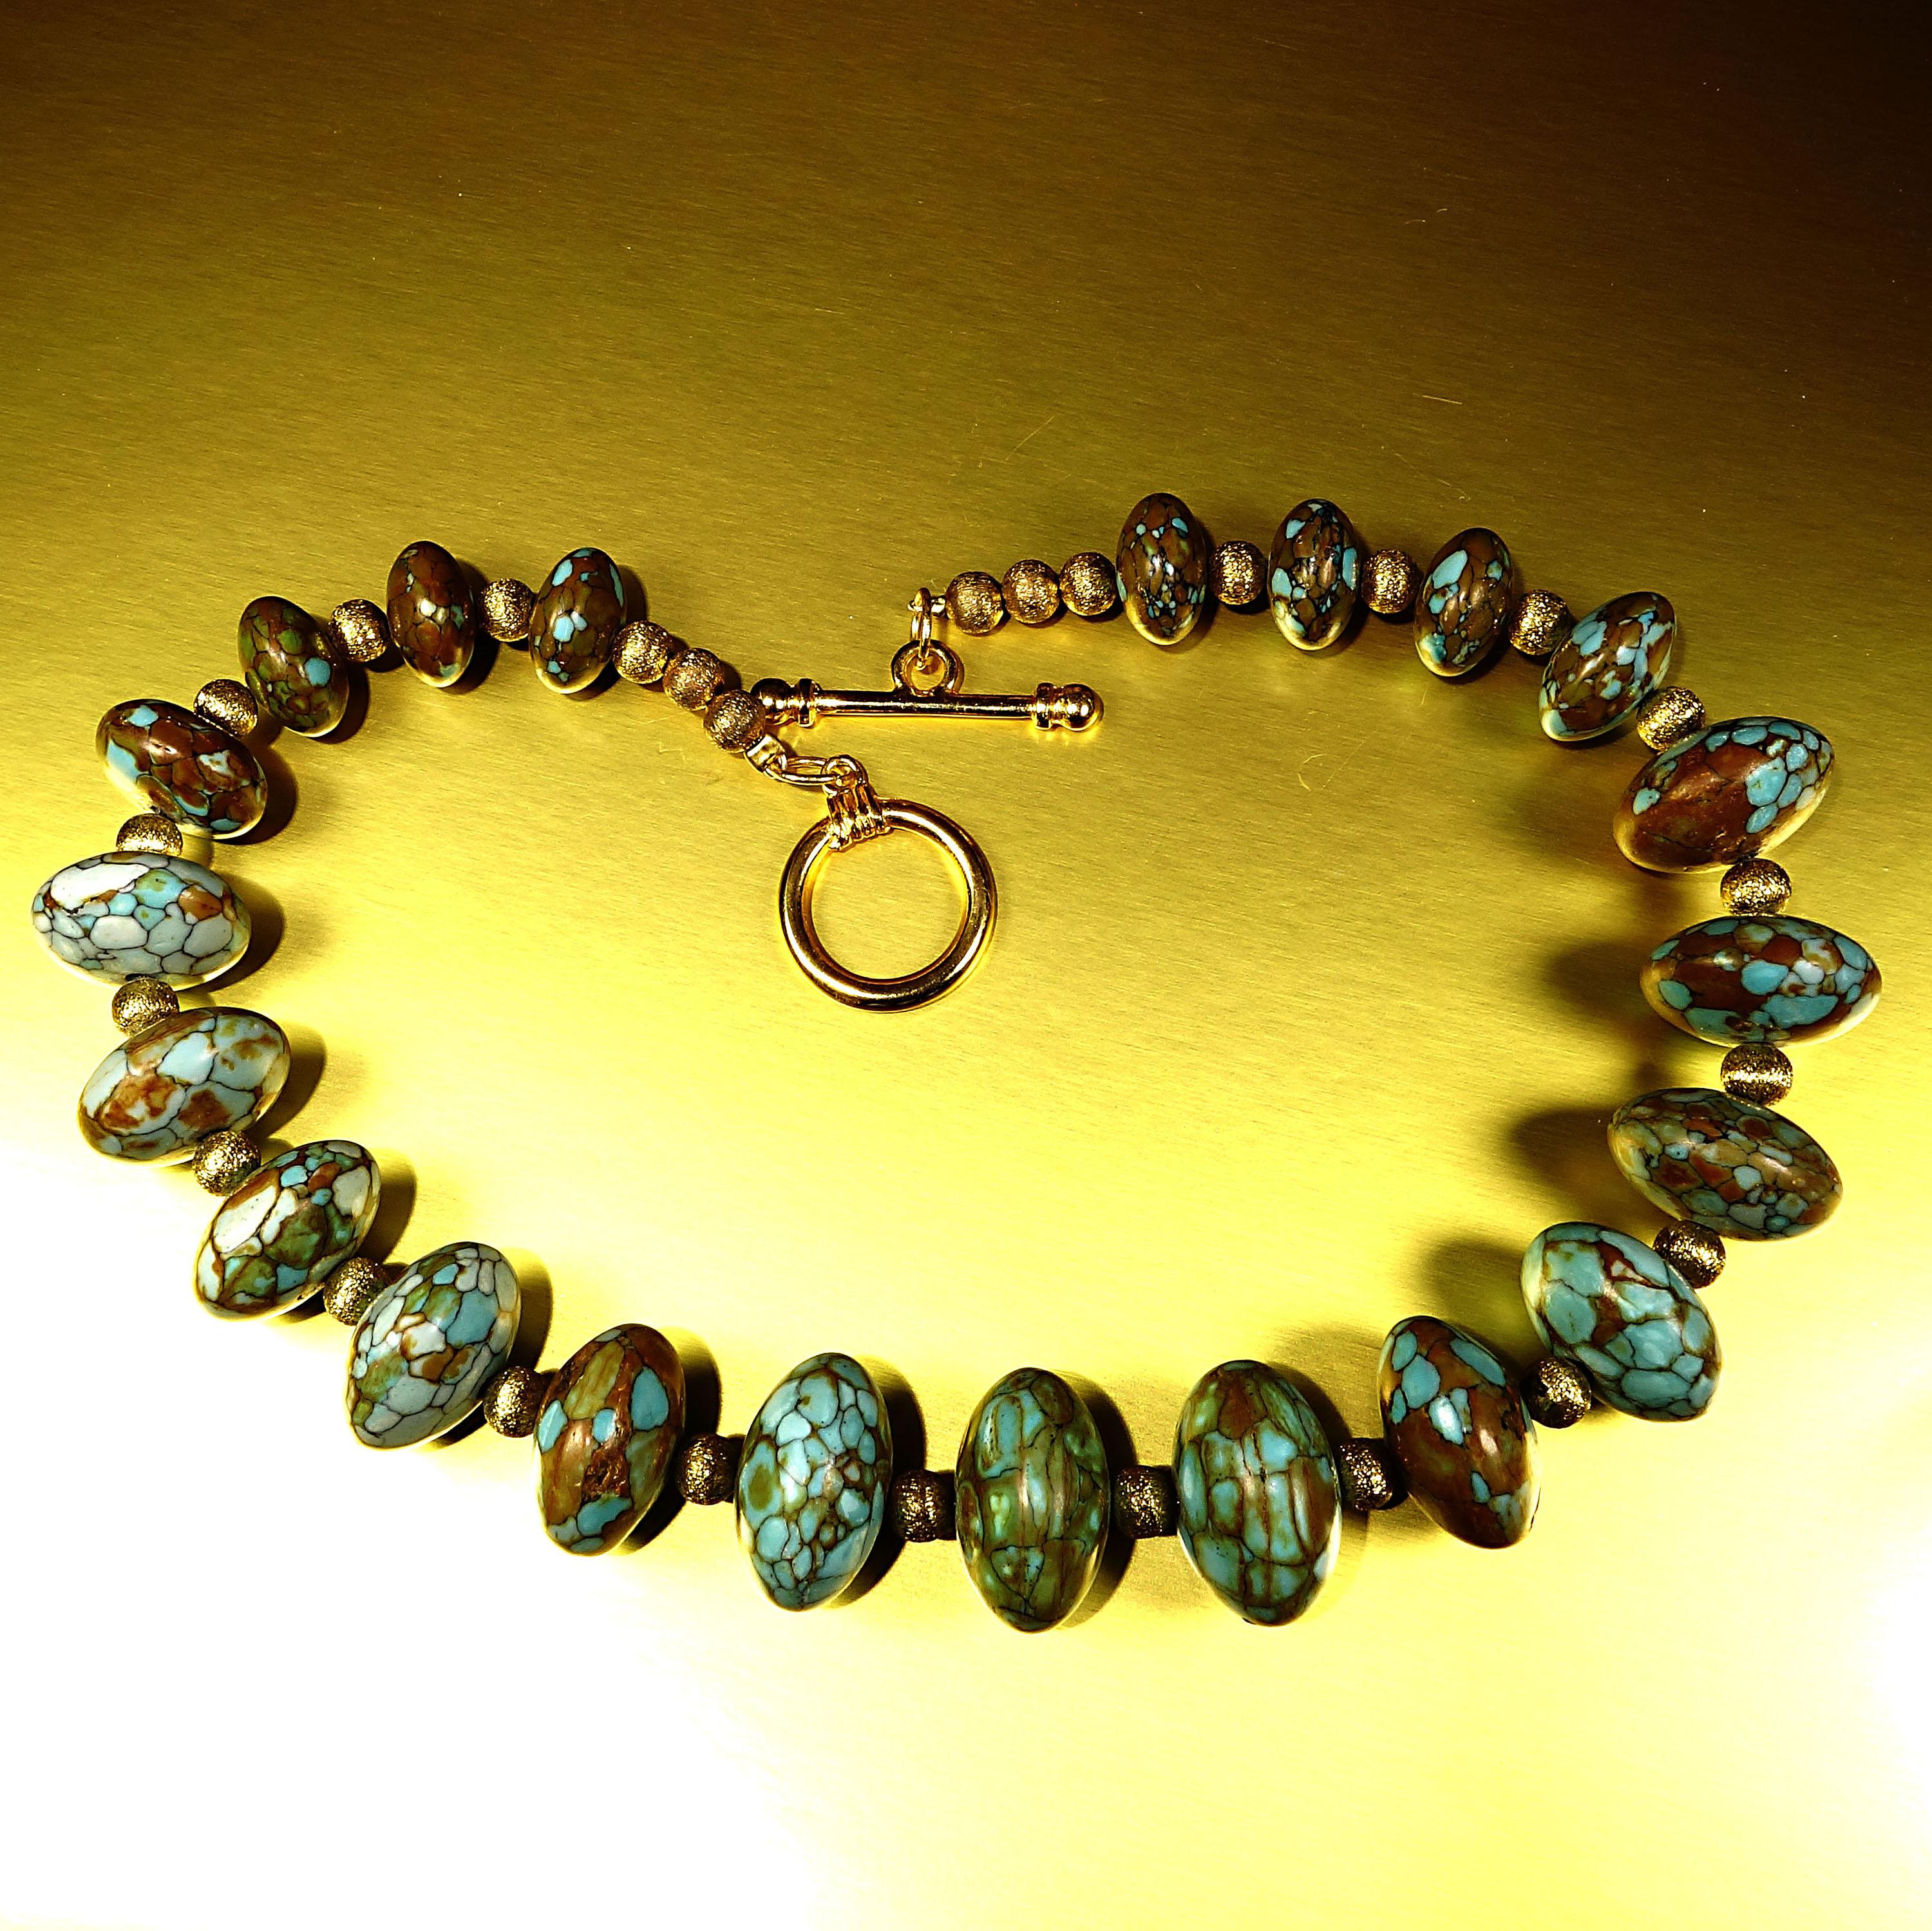 Bead Gemjunky Graduated Rondelles of Turquoise Necklace